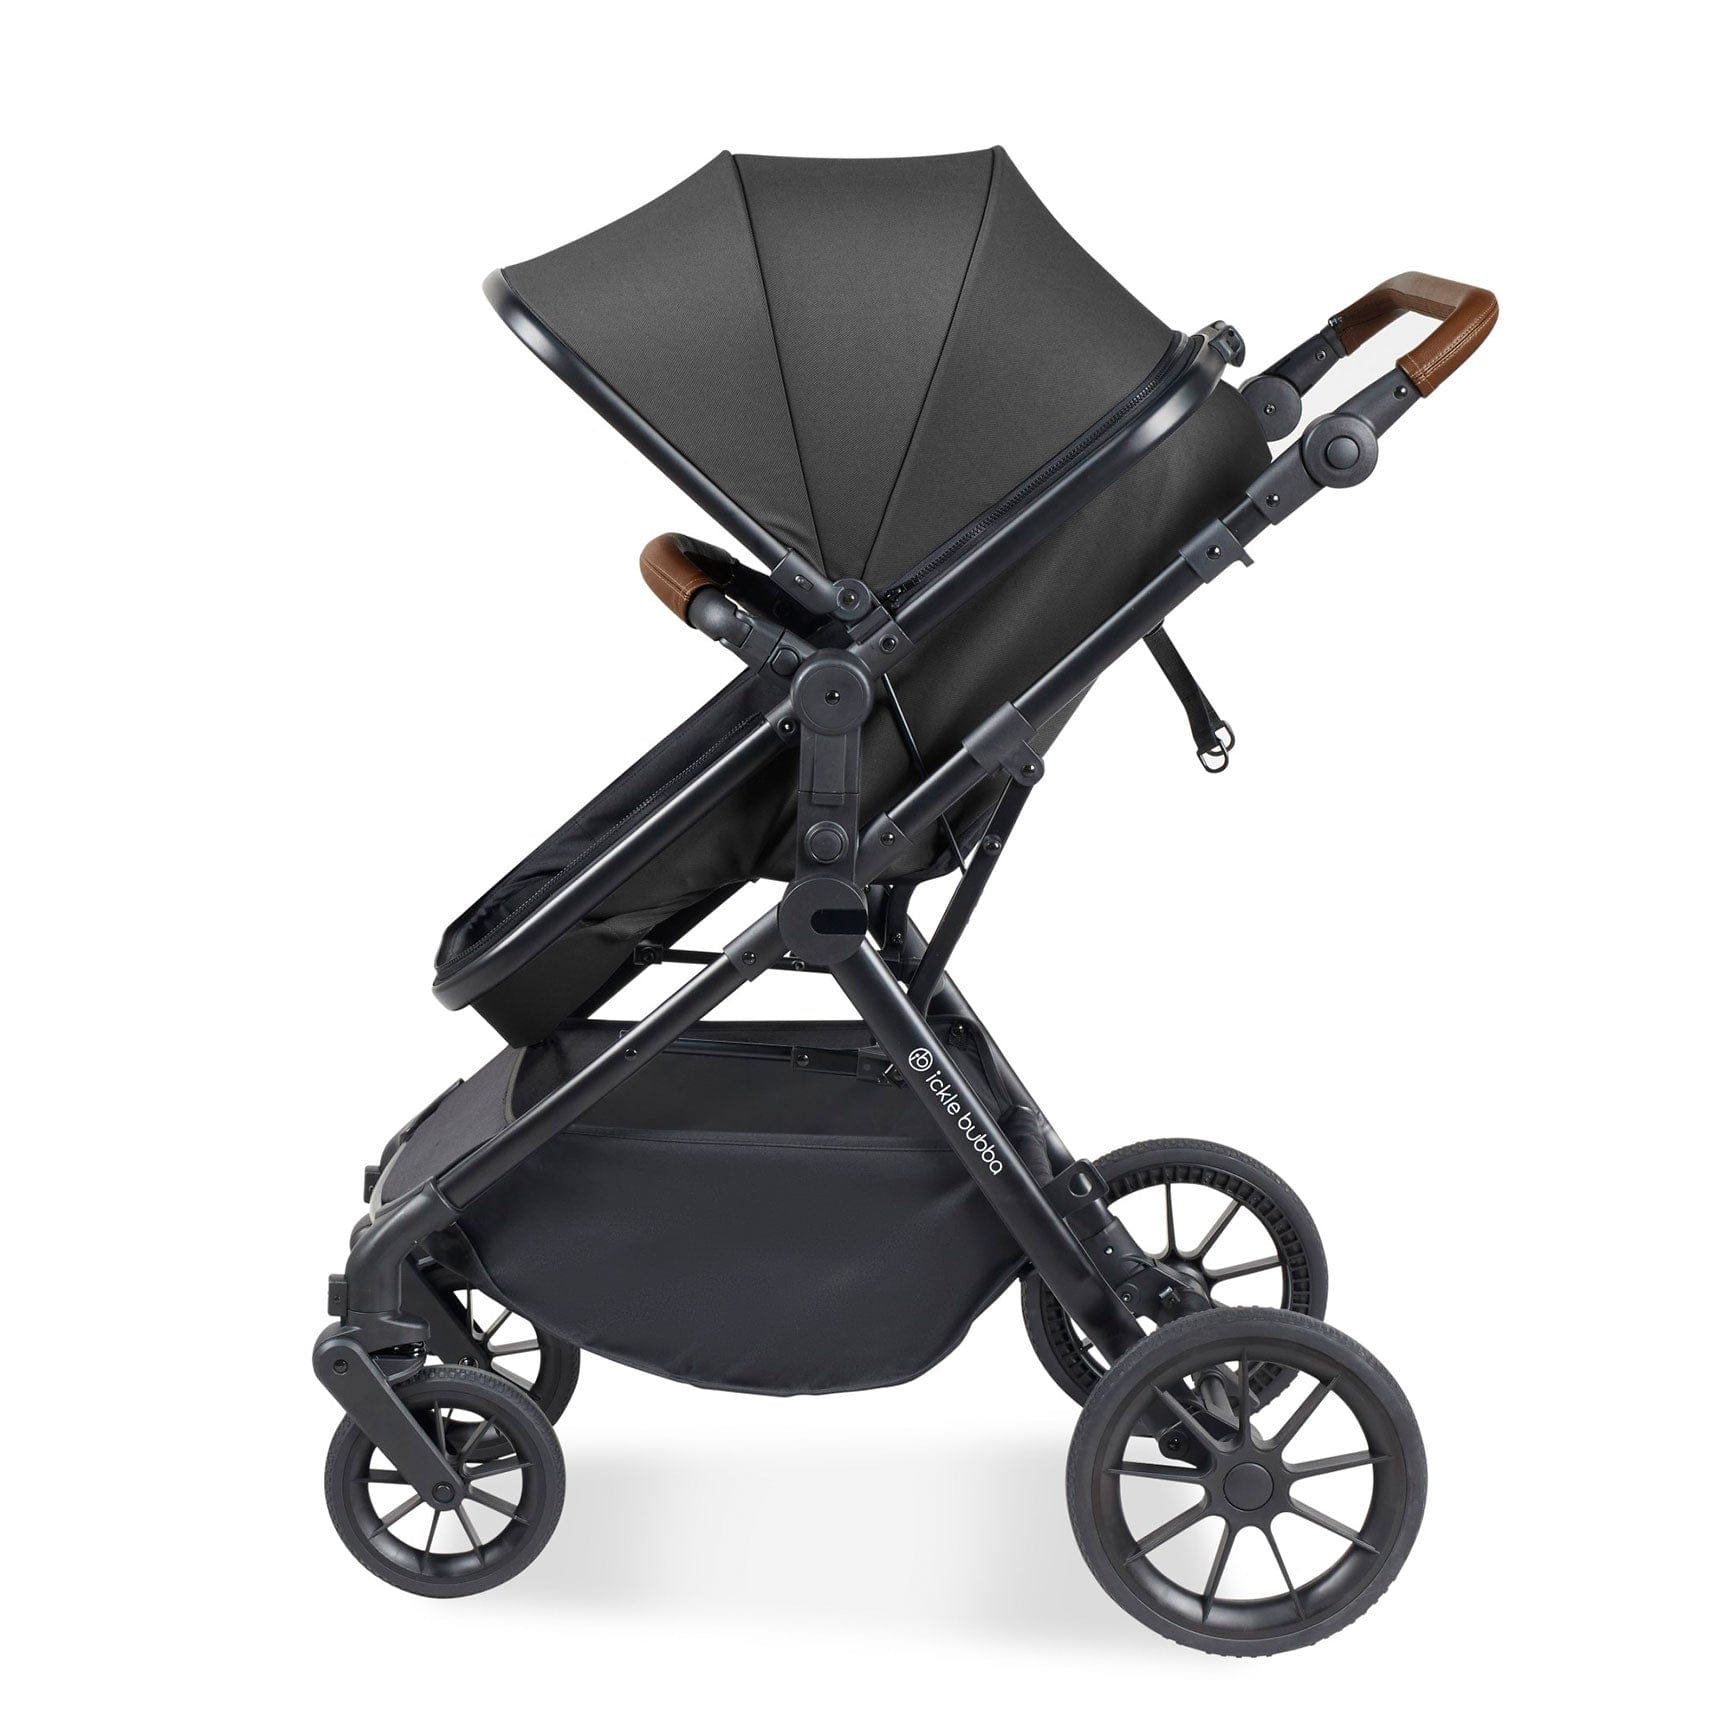 Ickle Bubba travel systems Ickle Bubba Cosmo All-in-One I-Size Travel System with Isofix Base - Black/Graphite Grey 10-007-300-007